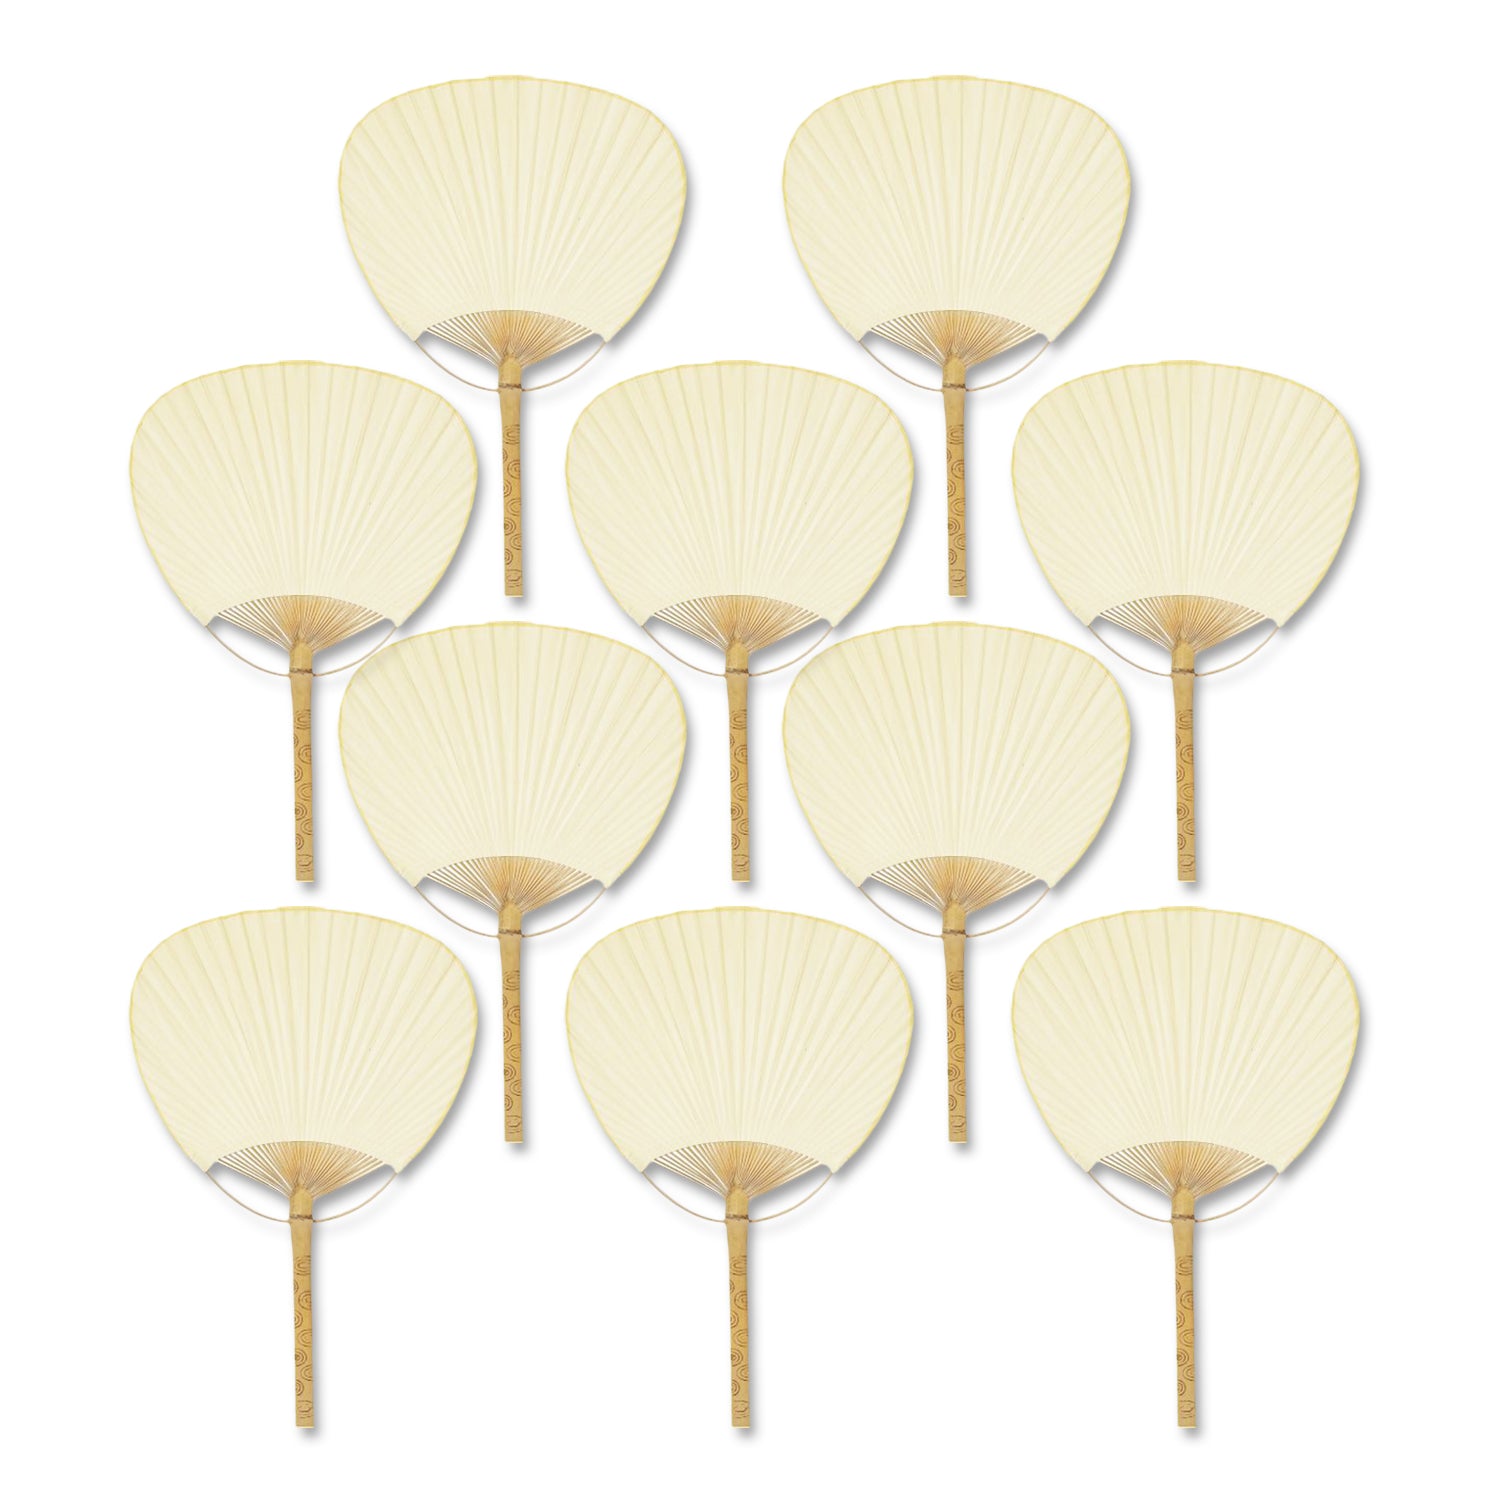 9" Beige / Ivory Paddle Paper Hand Fans for Weddings (10 Pack)